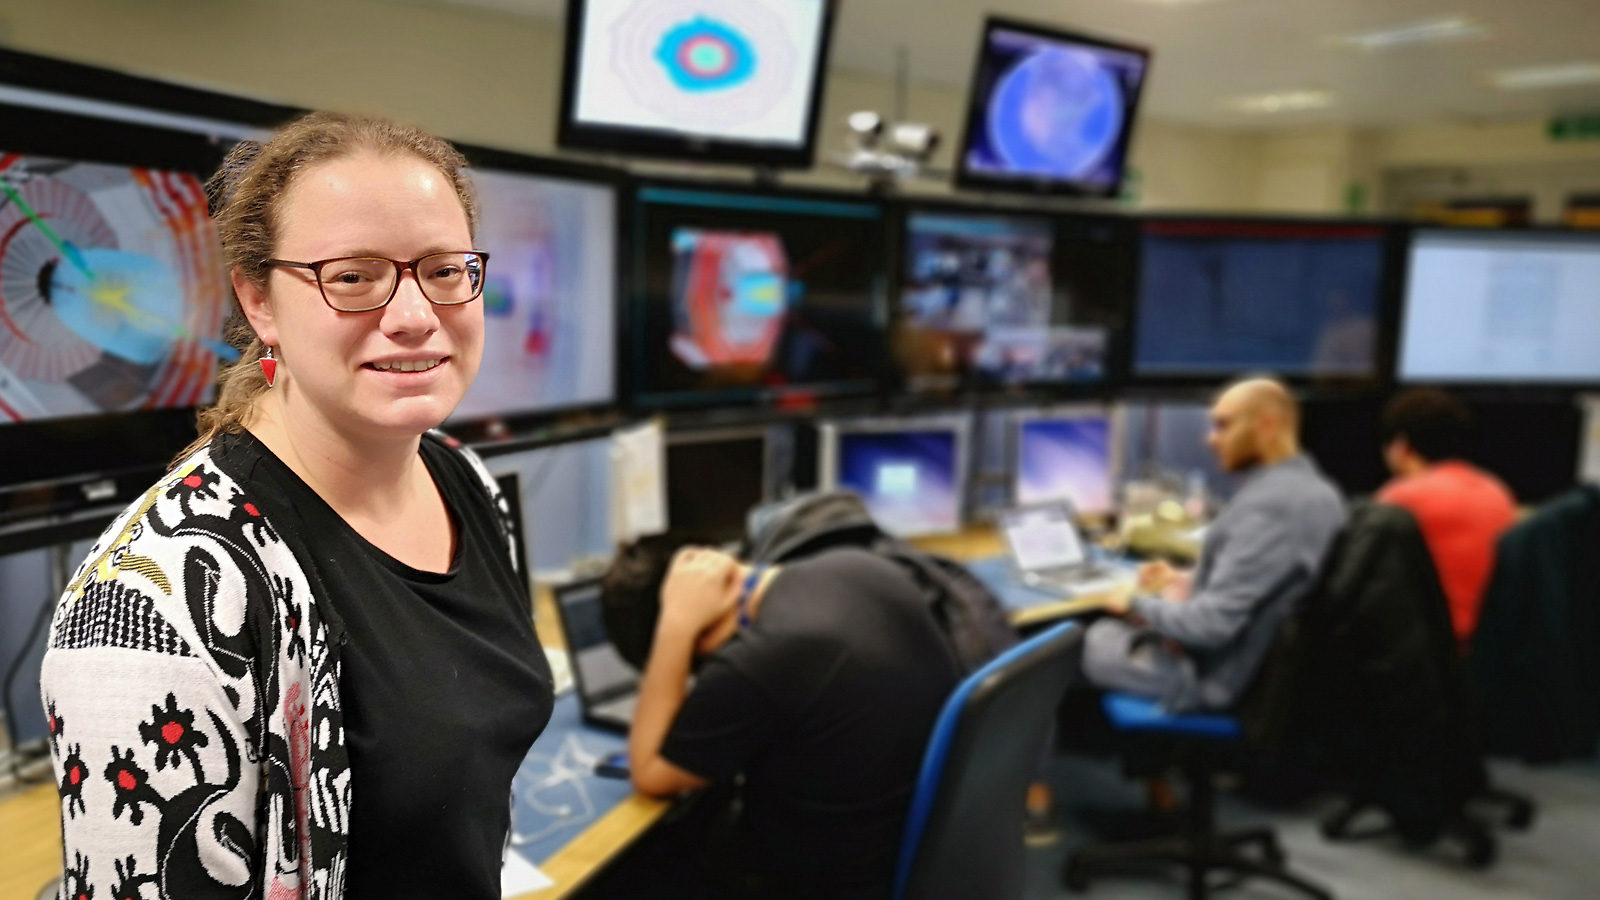 Image of a woman in glasses standing in front of several screens in a control room